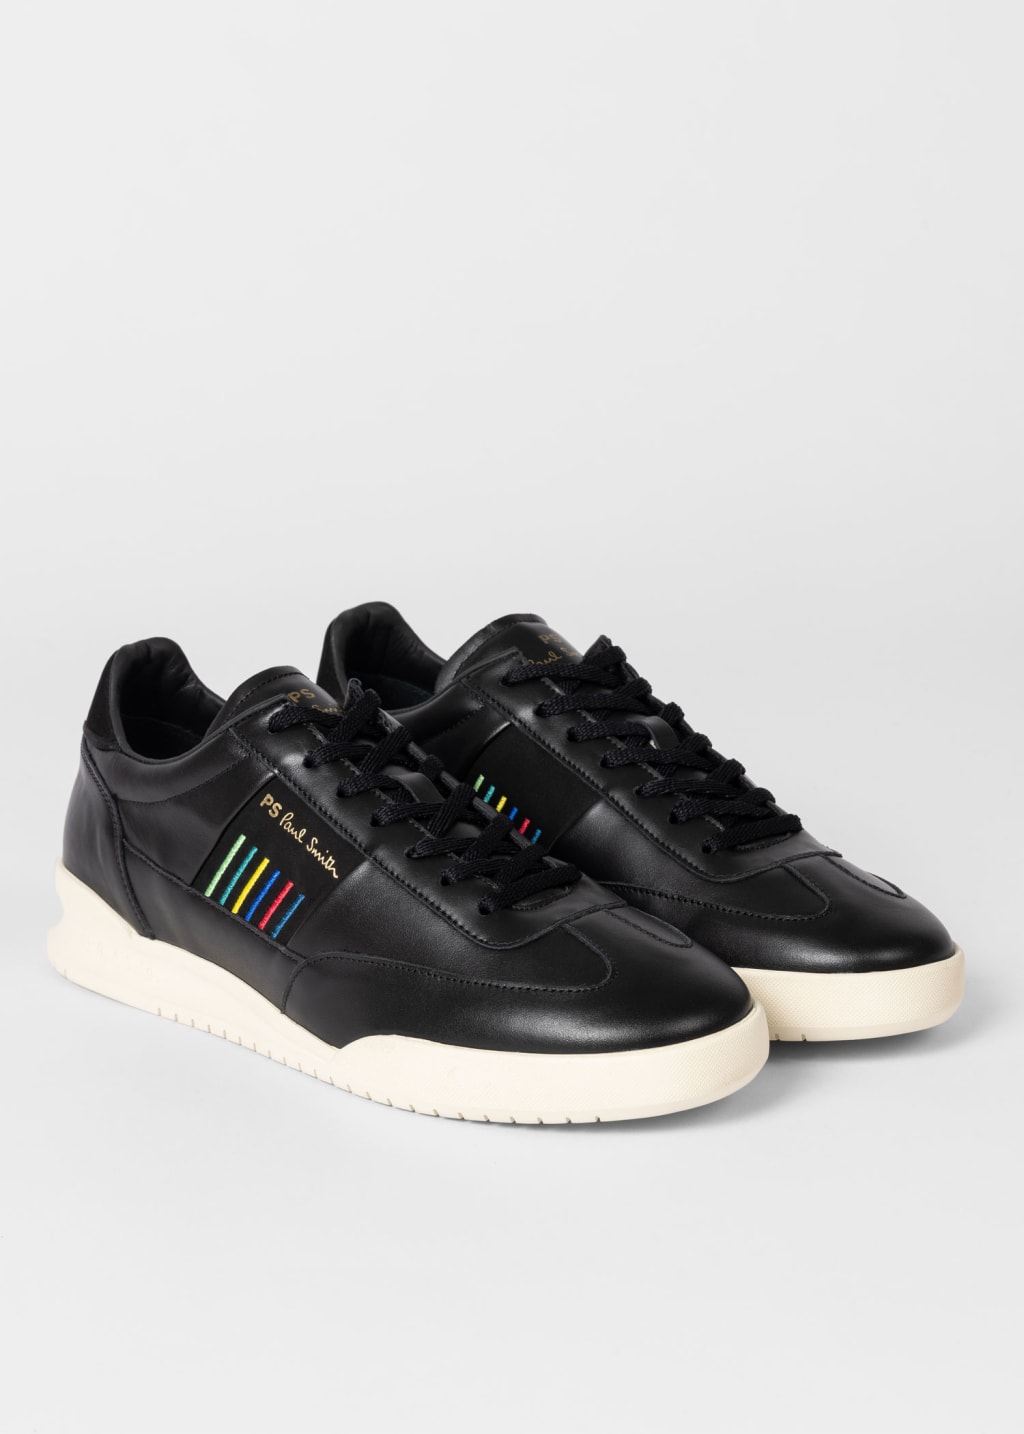 Detail View - Black Leather 'Dover' Trainers Paul Smith